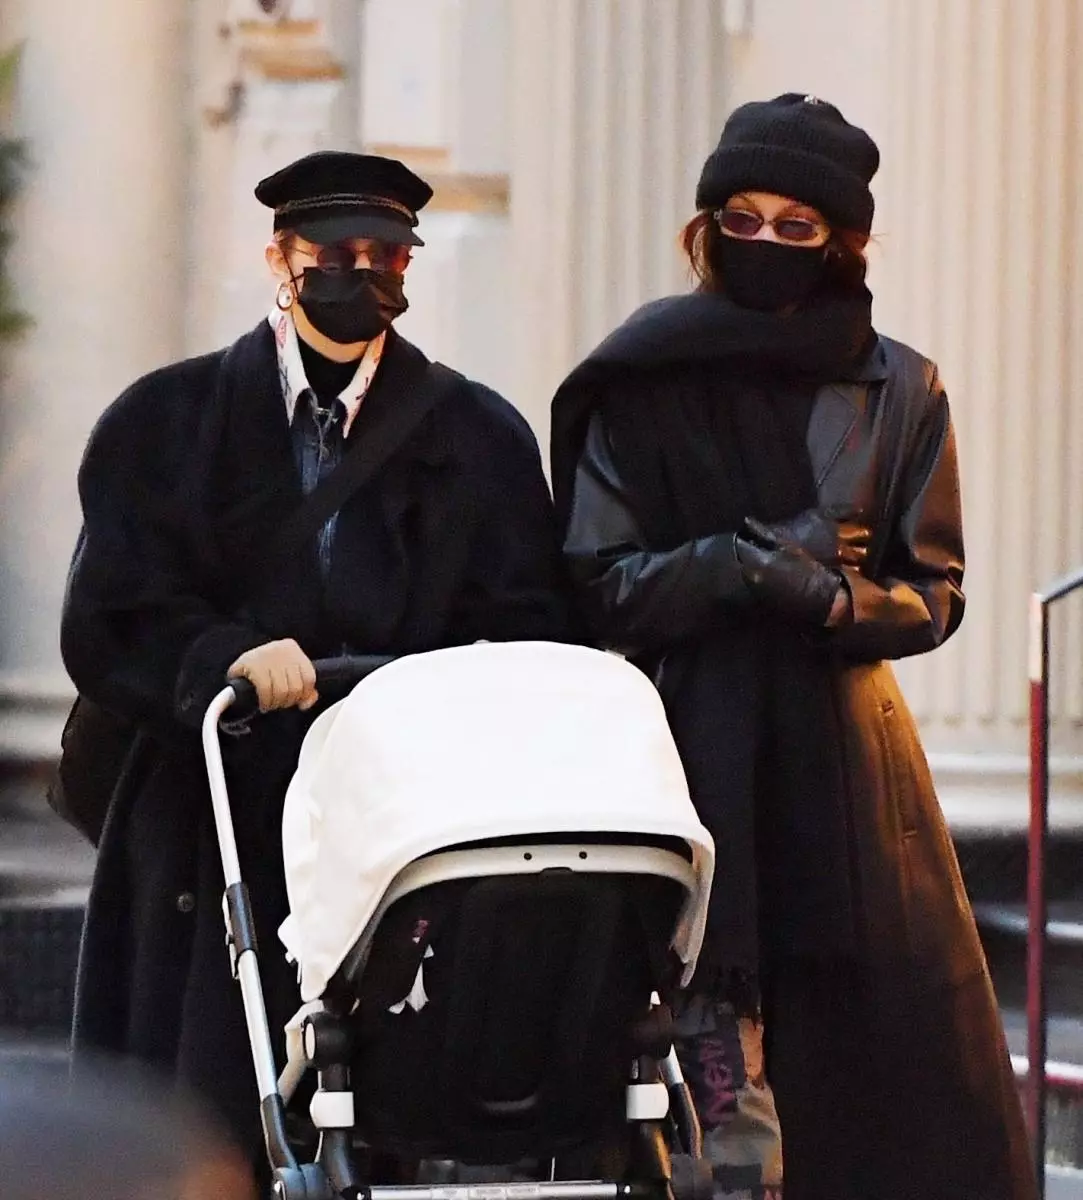 The disguise did not help: Jiji Hadid first captured for a walk with his daughter and Bella's sister 122634_1